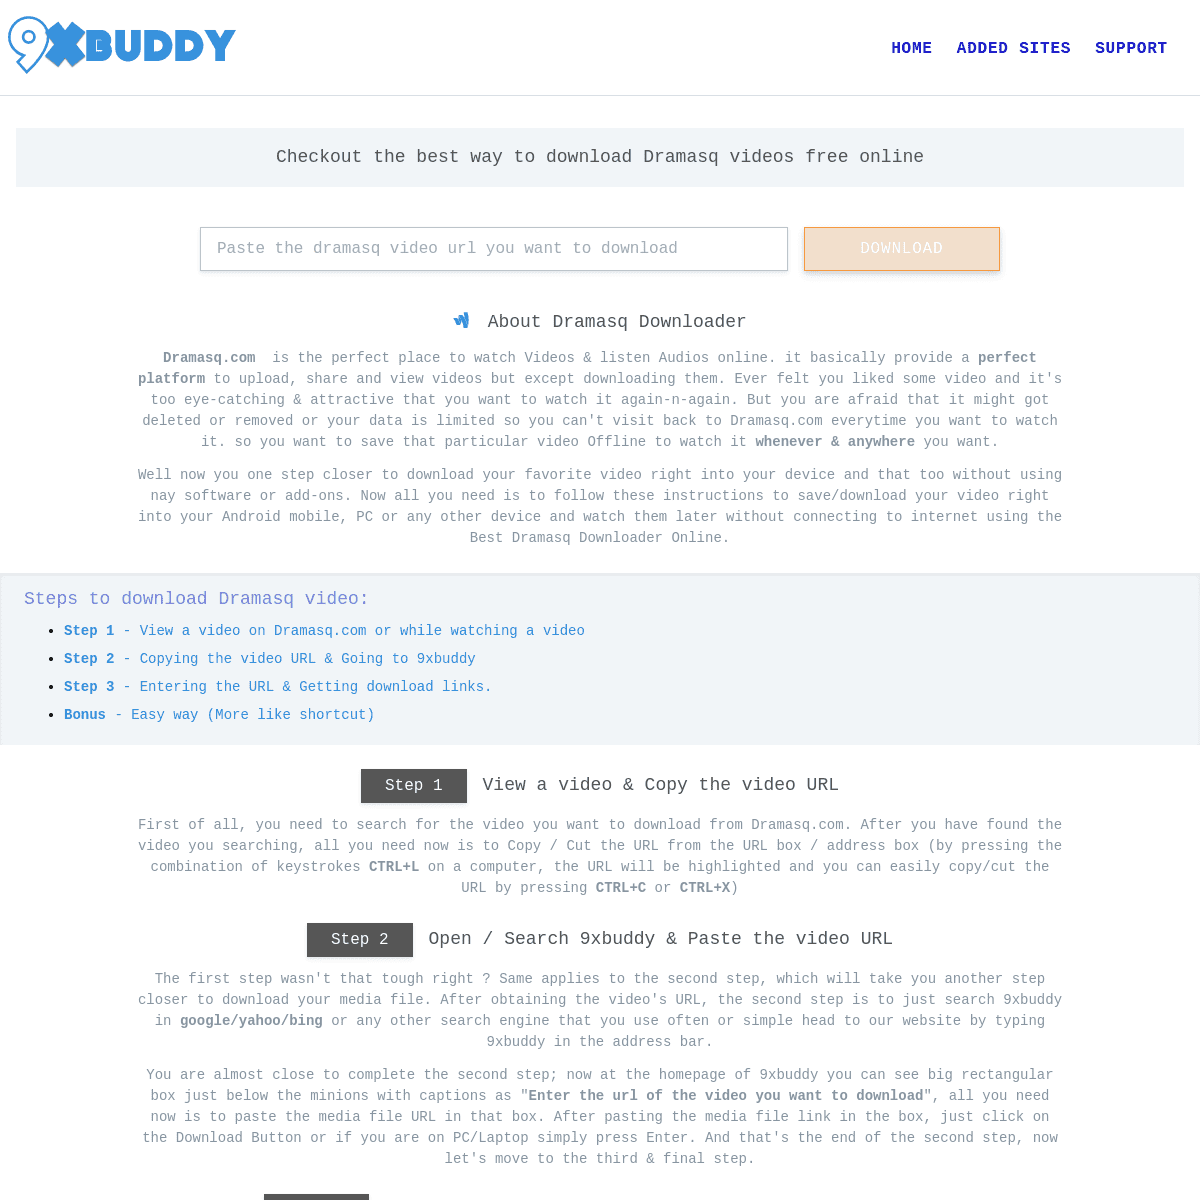 A complete backup of https://9xbuddy.org/sites/dramasq